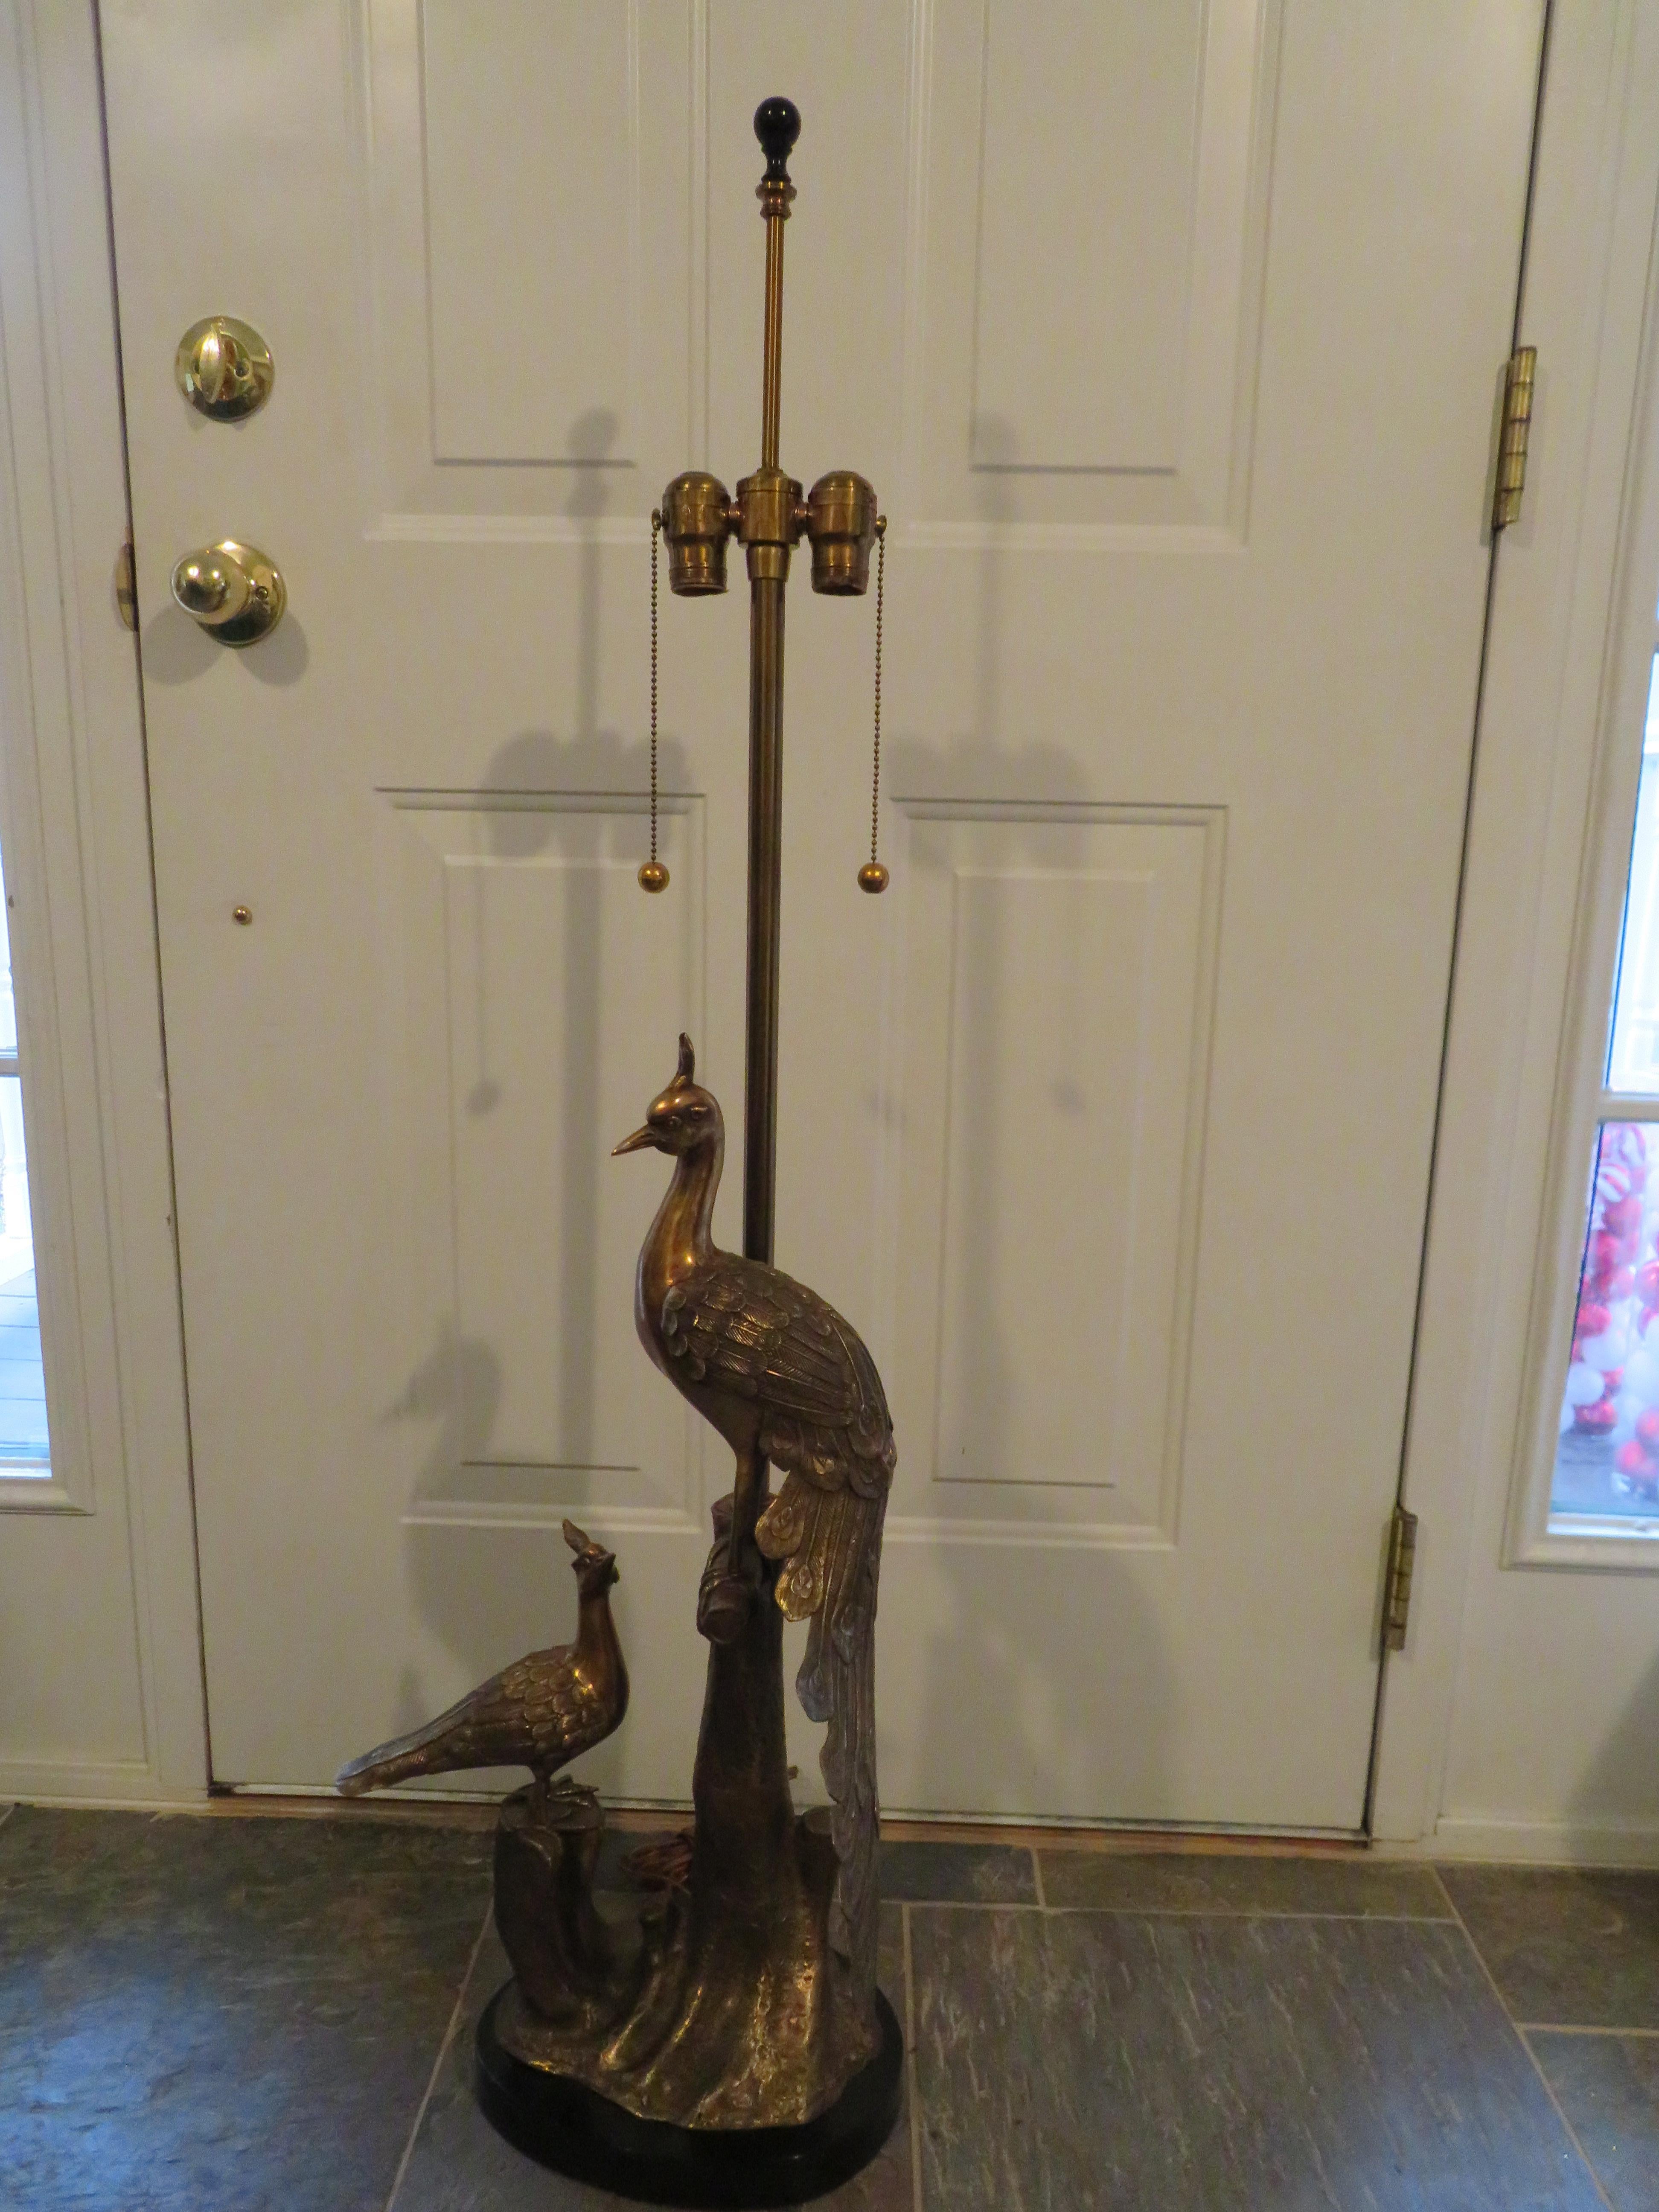 Gorgeous vintage brass Marbro table lamp depicting 2 peacocks sitting on a tree stump. We love the larger mother peacock watching over her baby who is lovingly looking up at her-so adorable! This table lamp is by the Markoff brothers of The Marbro